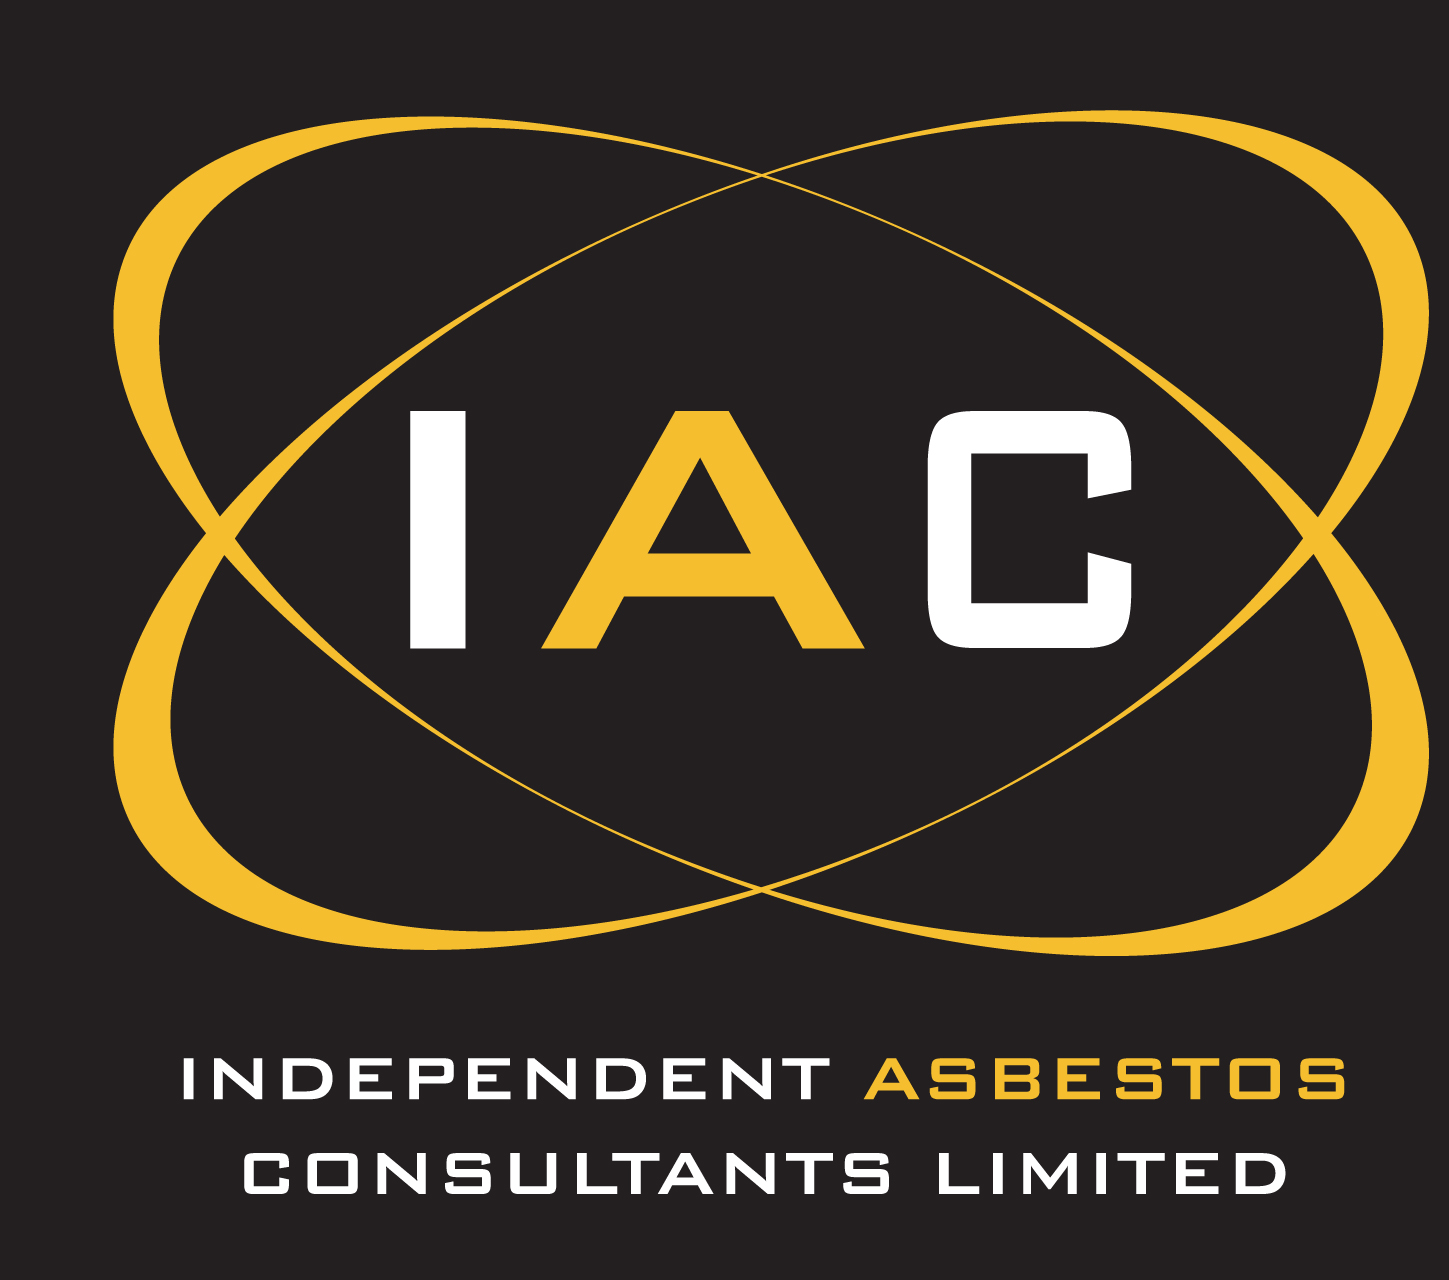 Independent Asbestos Consultants Limited